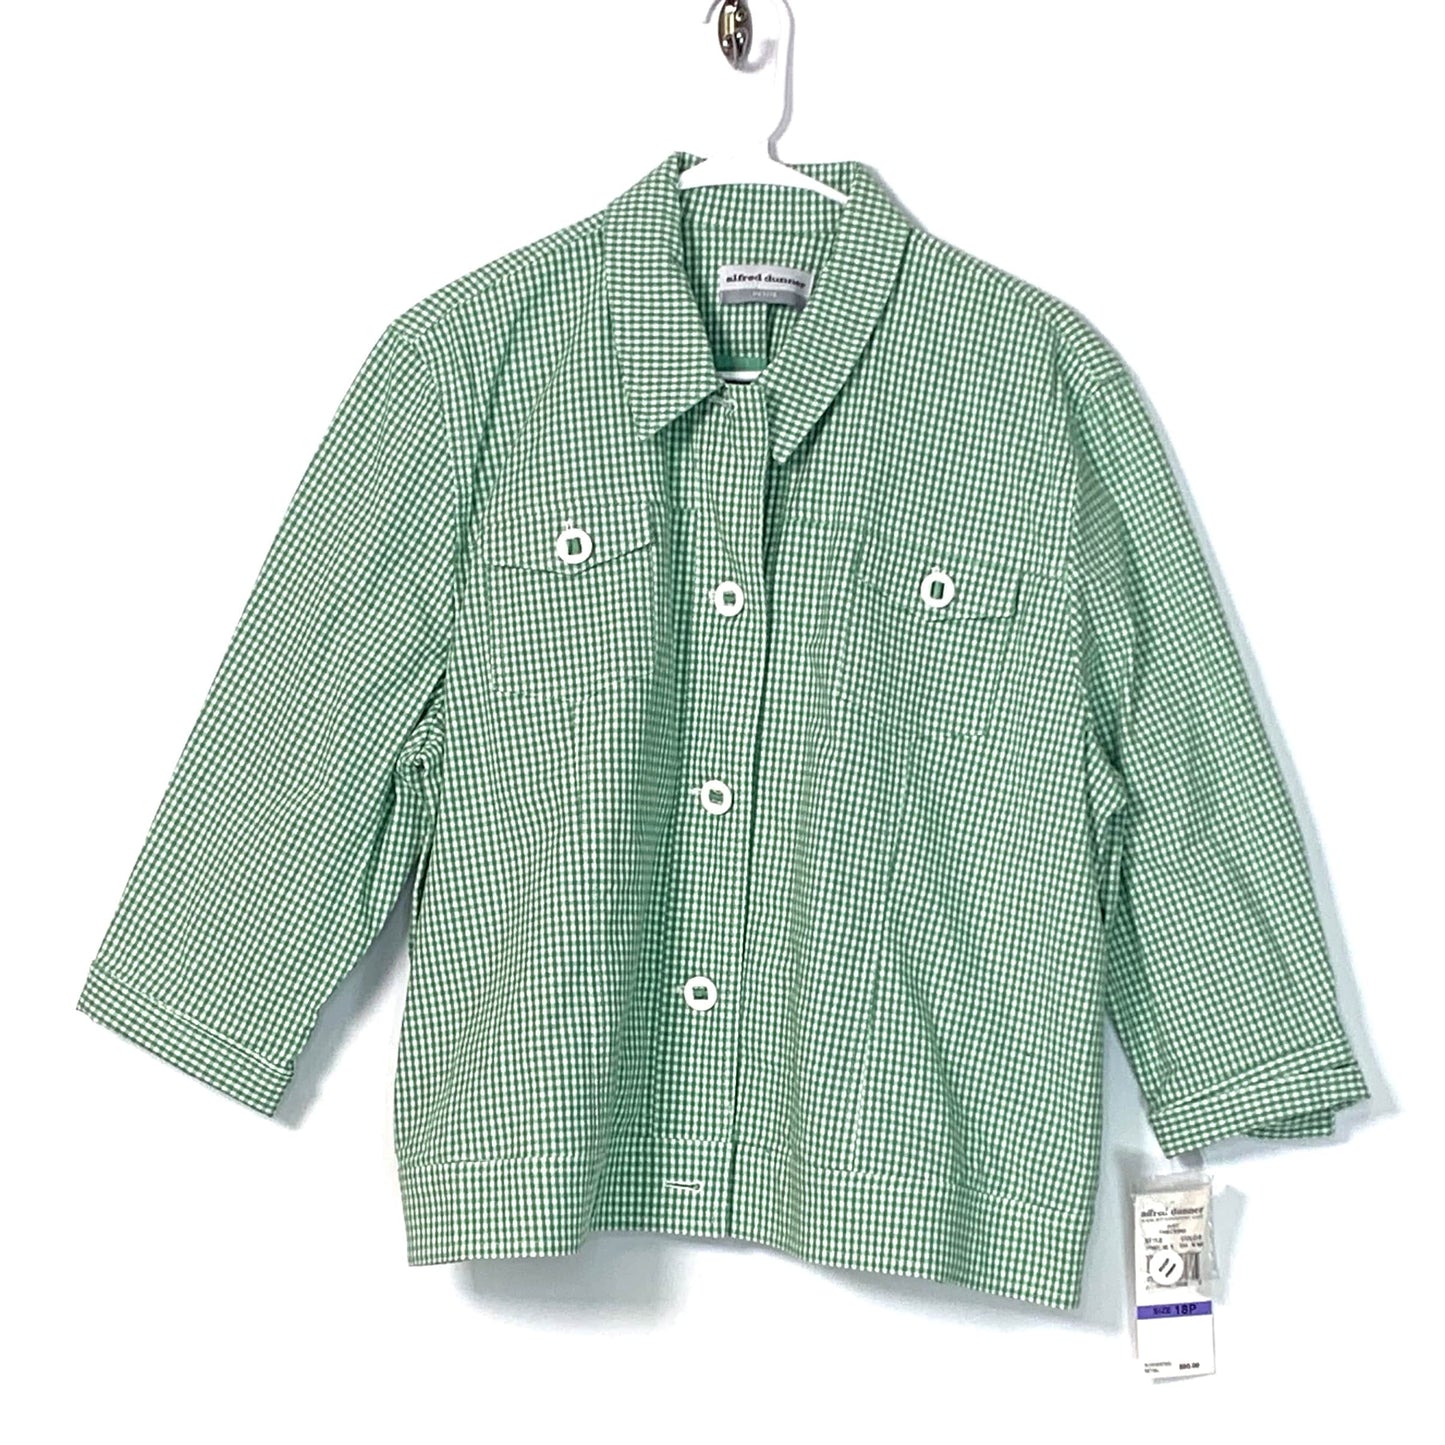 Alfred Dunner Womens Petite Jacket 18P Green Check “Just Checking”